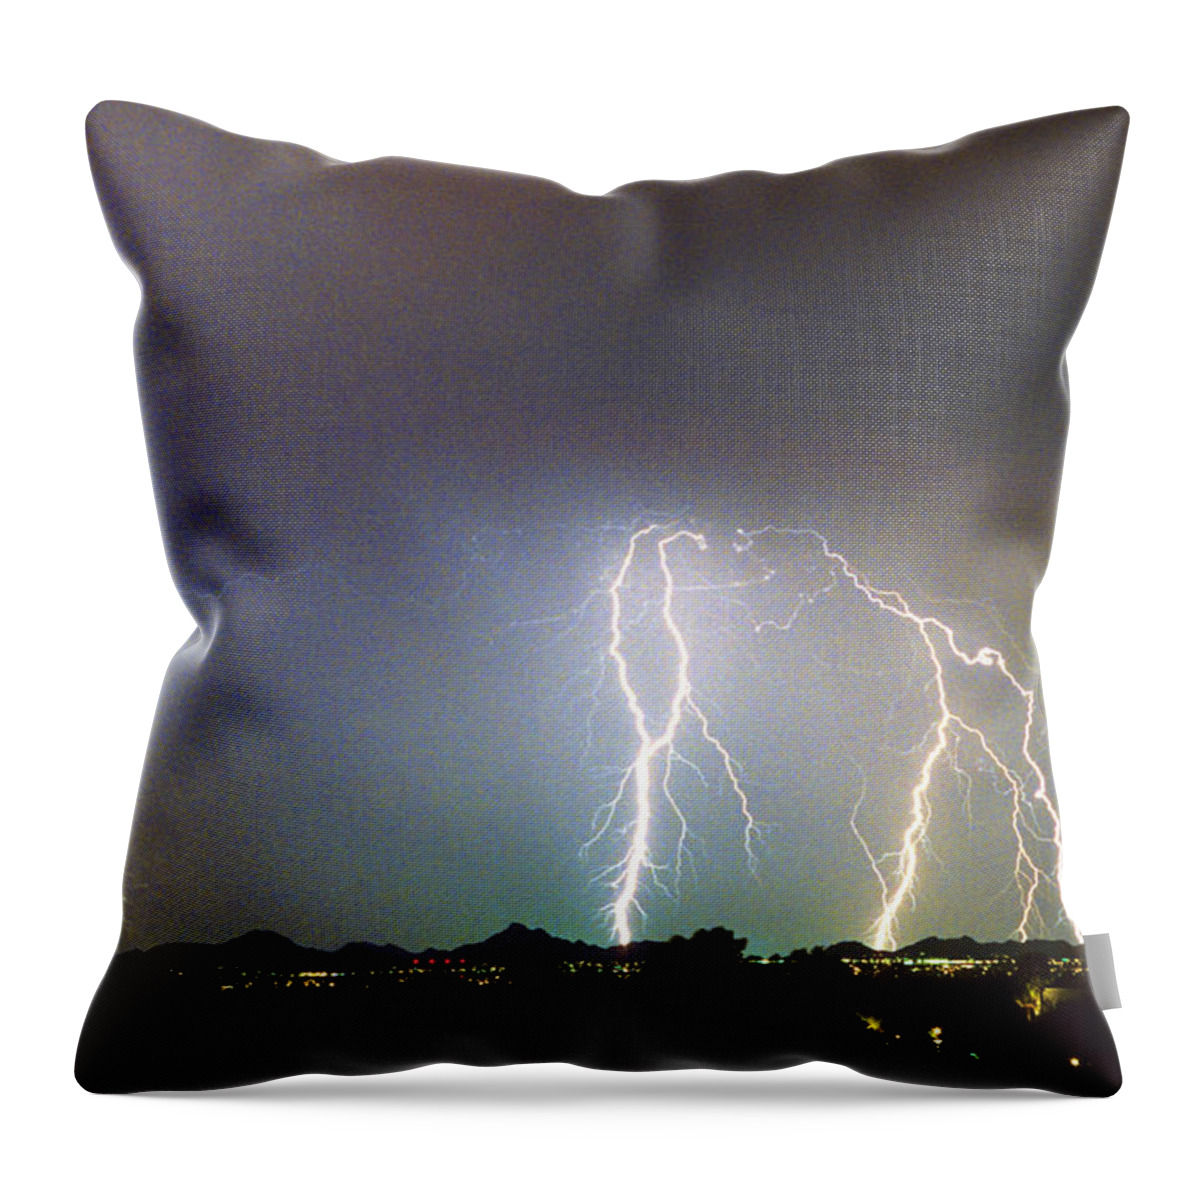 Arizona Throw Pillow featuring the photograph View from Oaxaca Restaurant ll by James BO Insogna